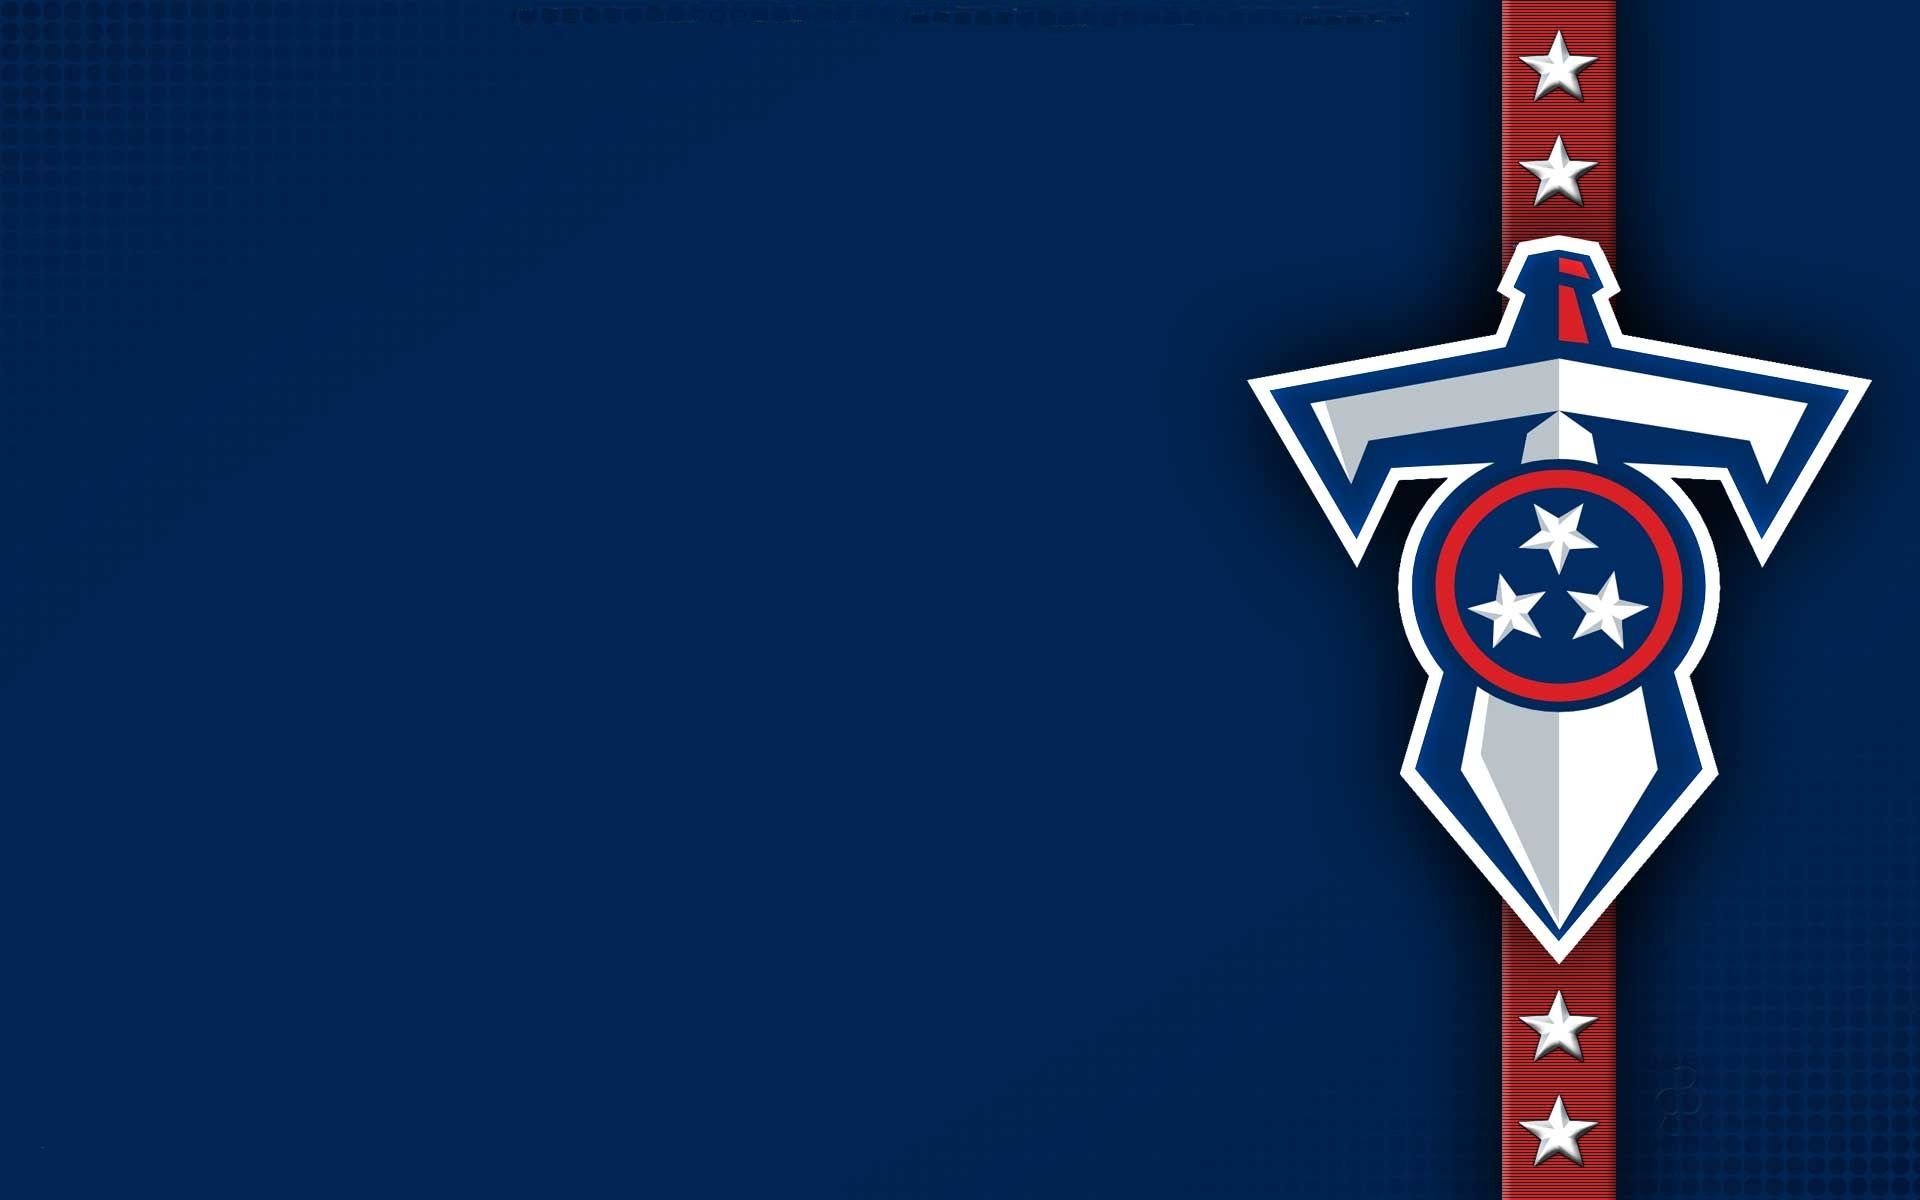 NFL Tennessee Titans, flag of team free image download